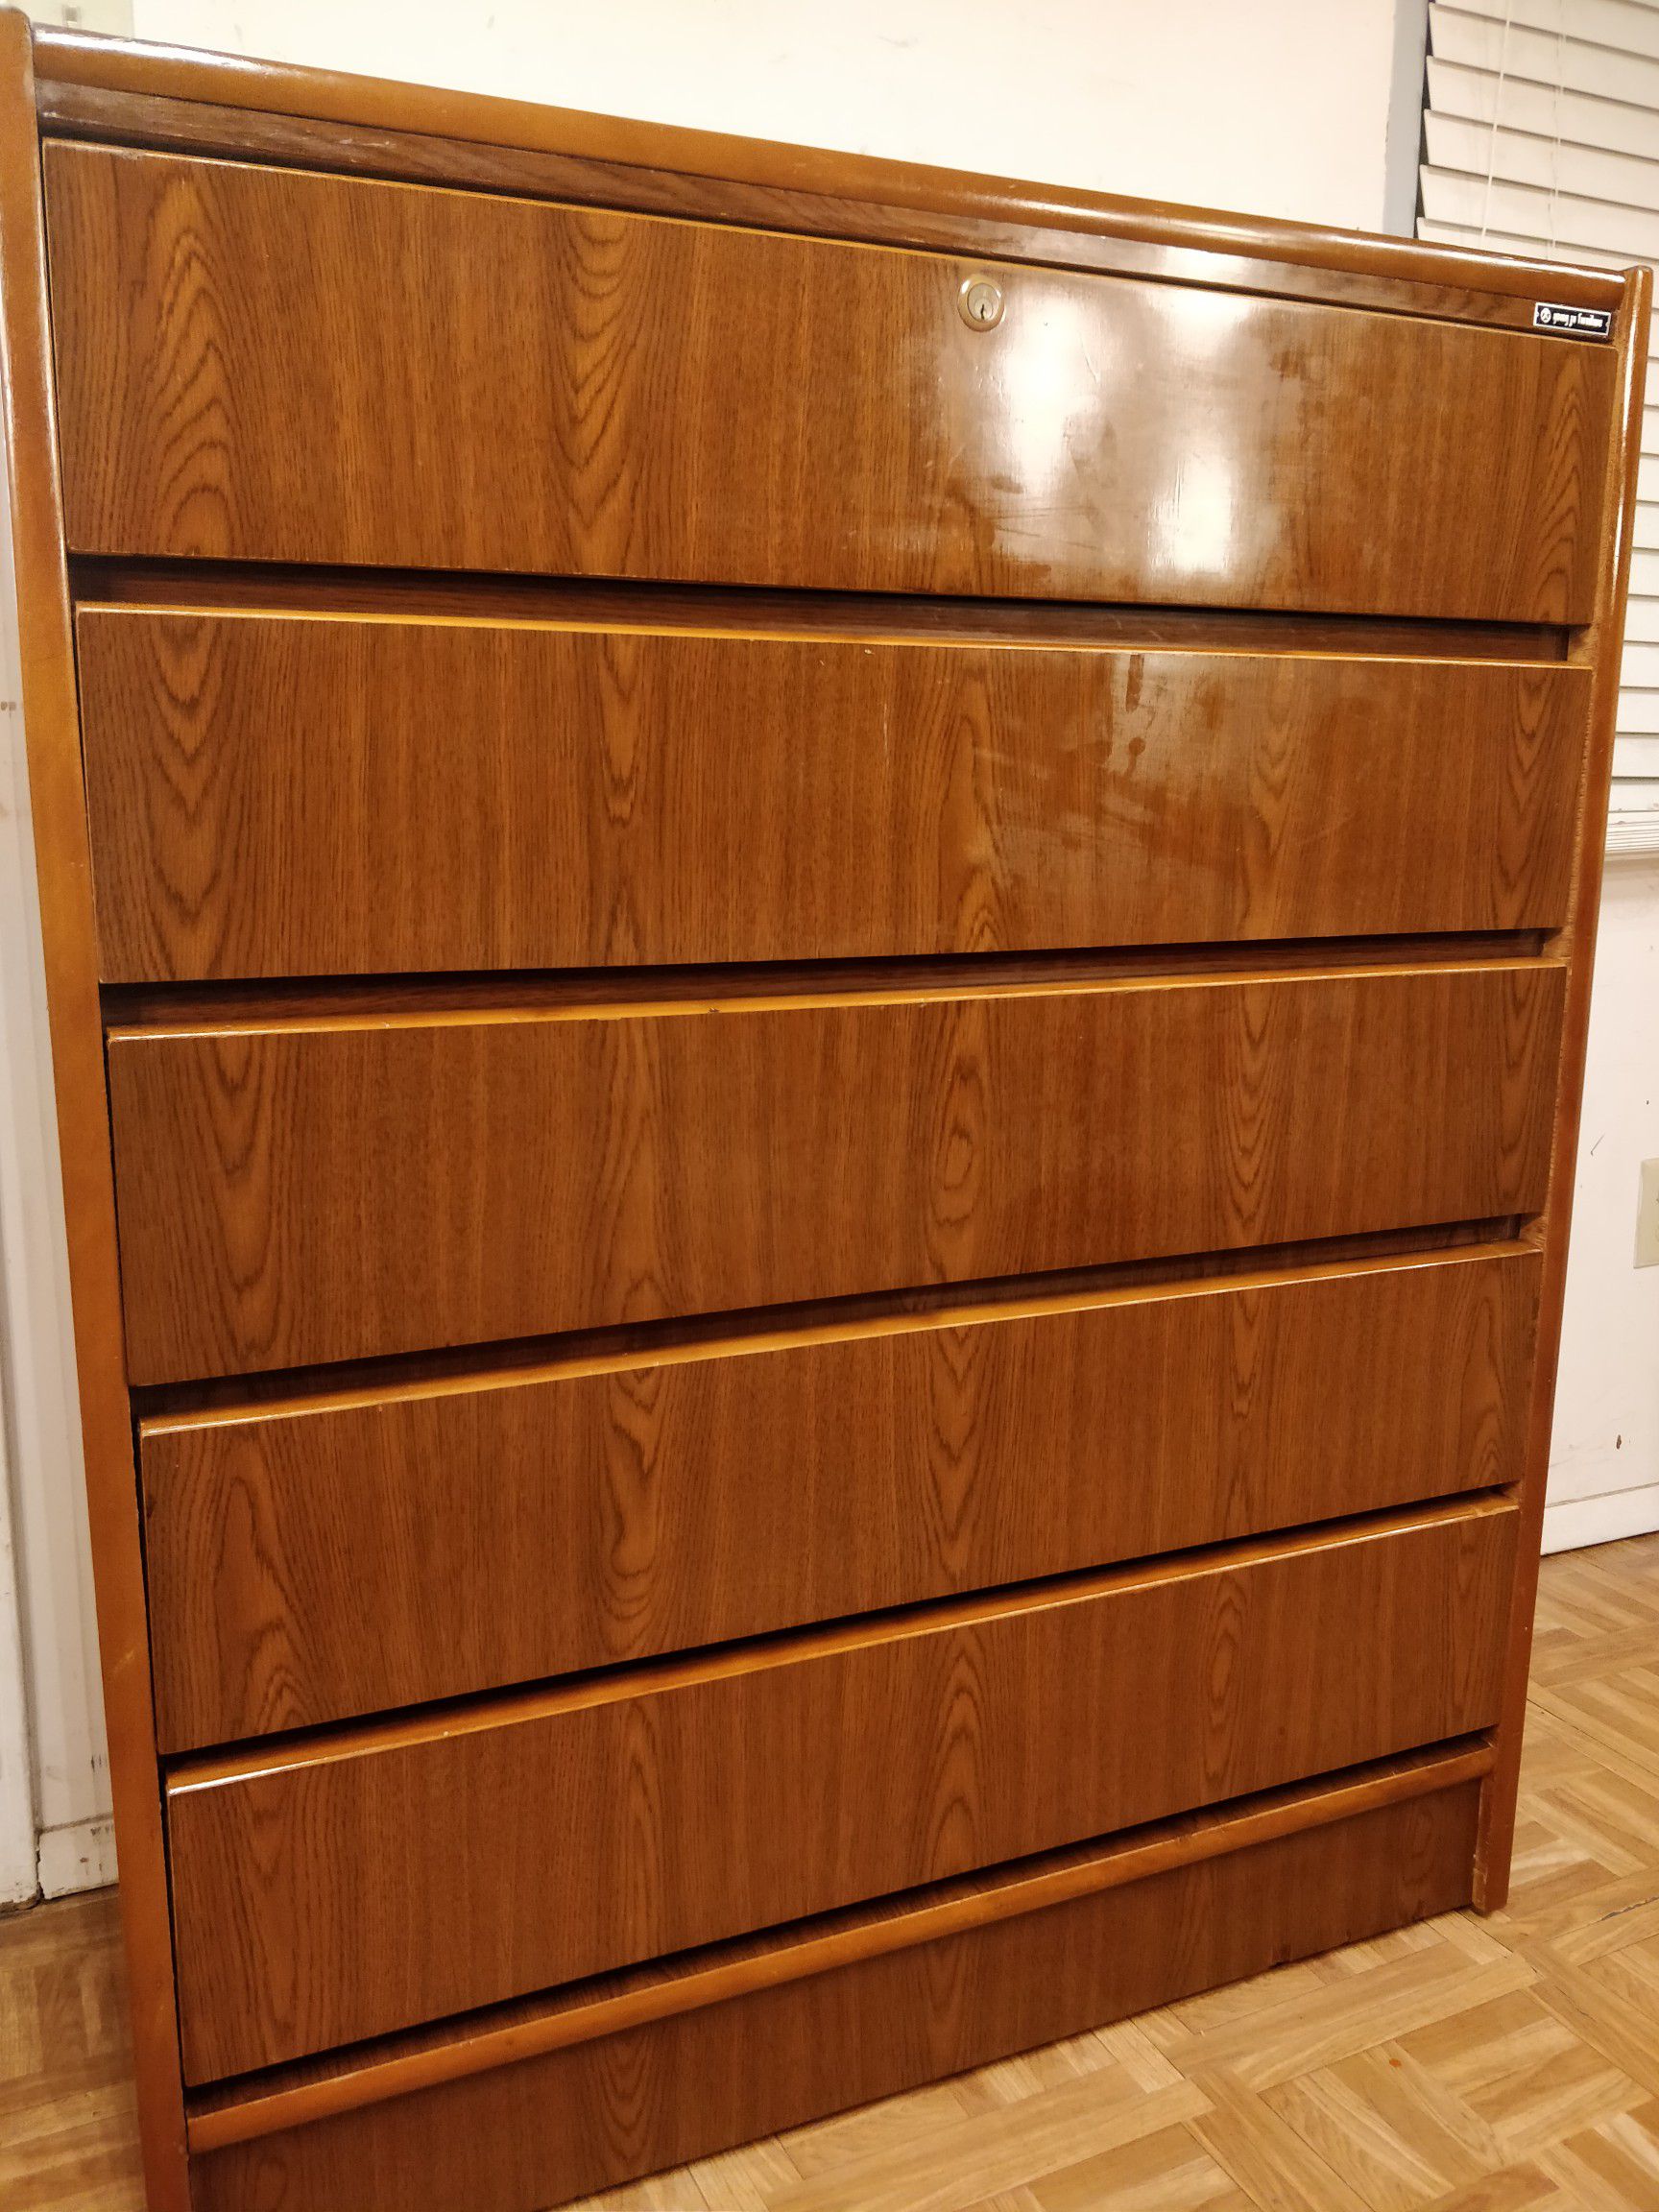 Nice dresser/TV stand with big 5 drawers in good condition, all drawers working well, dovetail drawers. L39"*W17.5"*H47"